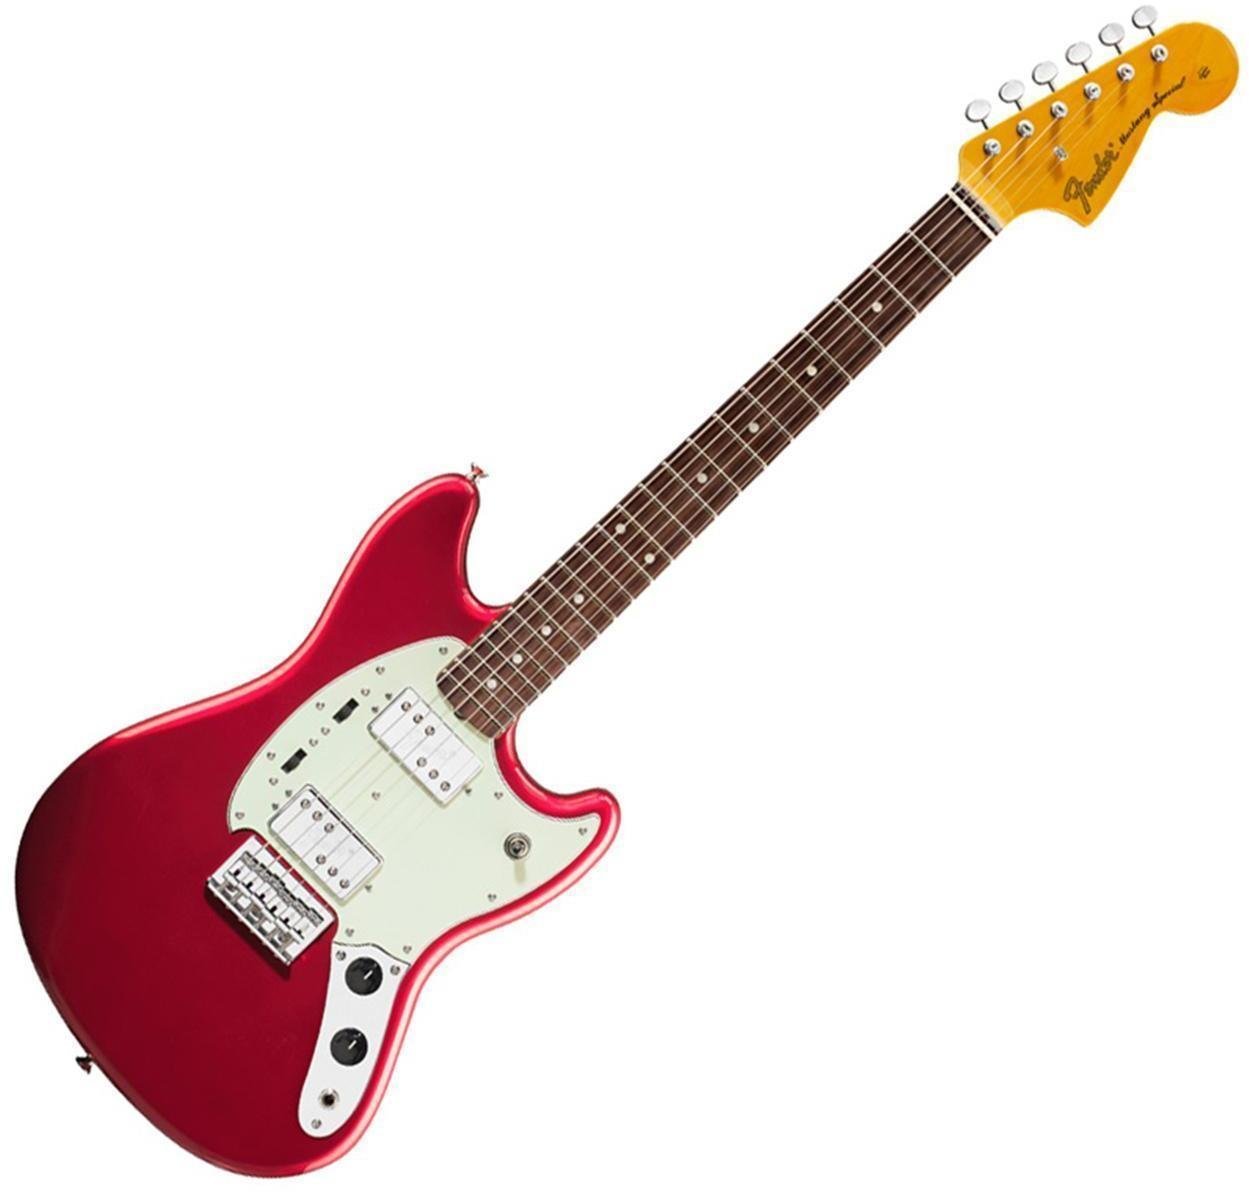 E-Gitarre Fender Pawn Shop Mustang Special, Rosewood Fingerboard, Candy Apple Red